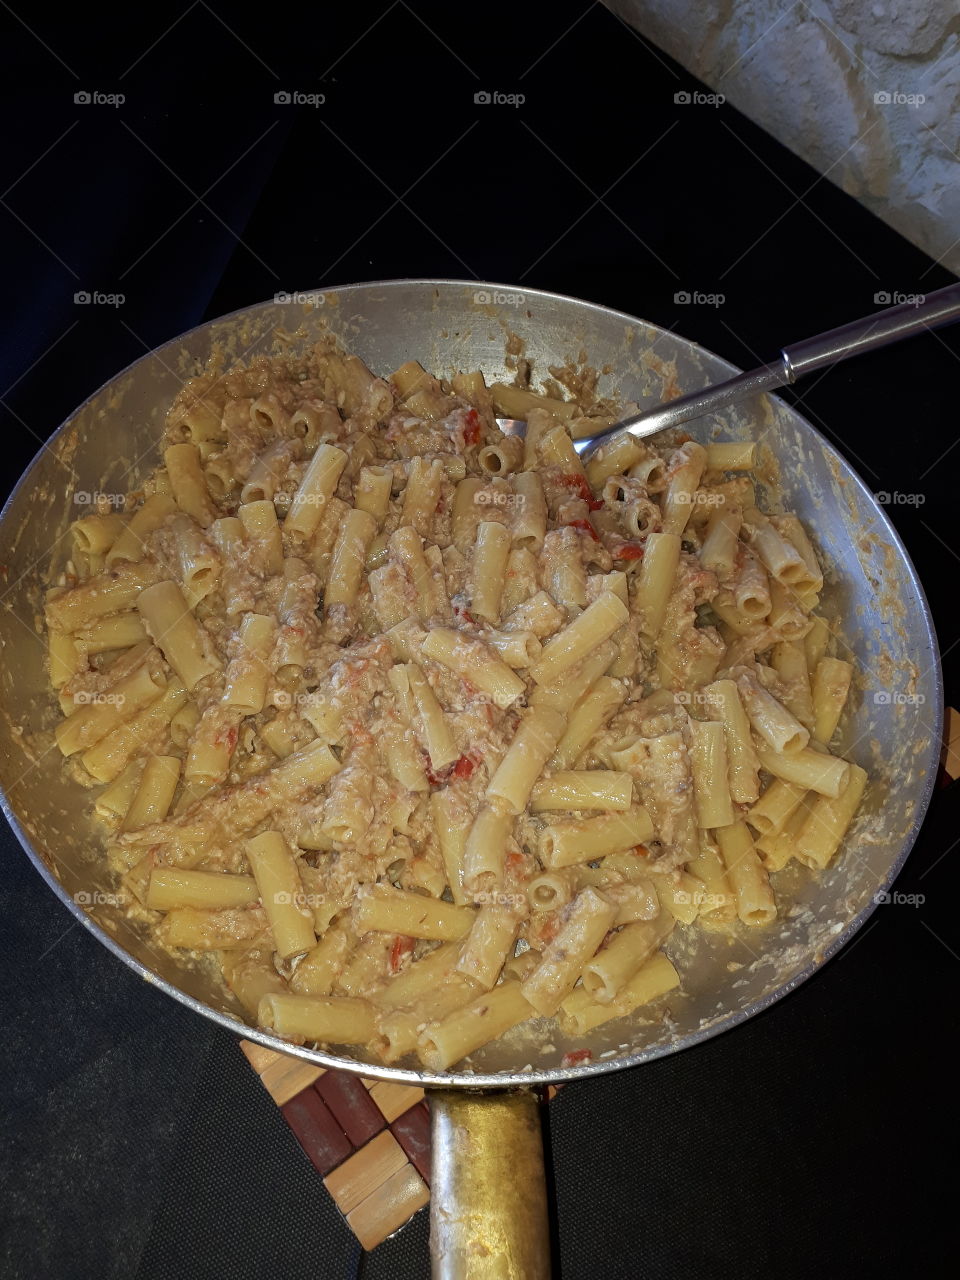 Food, No Person, Pasta, Cooking, Meal